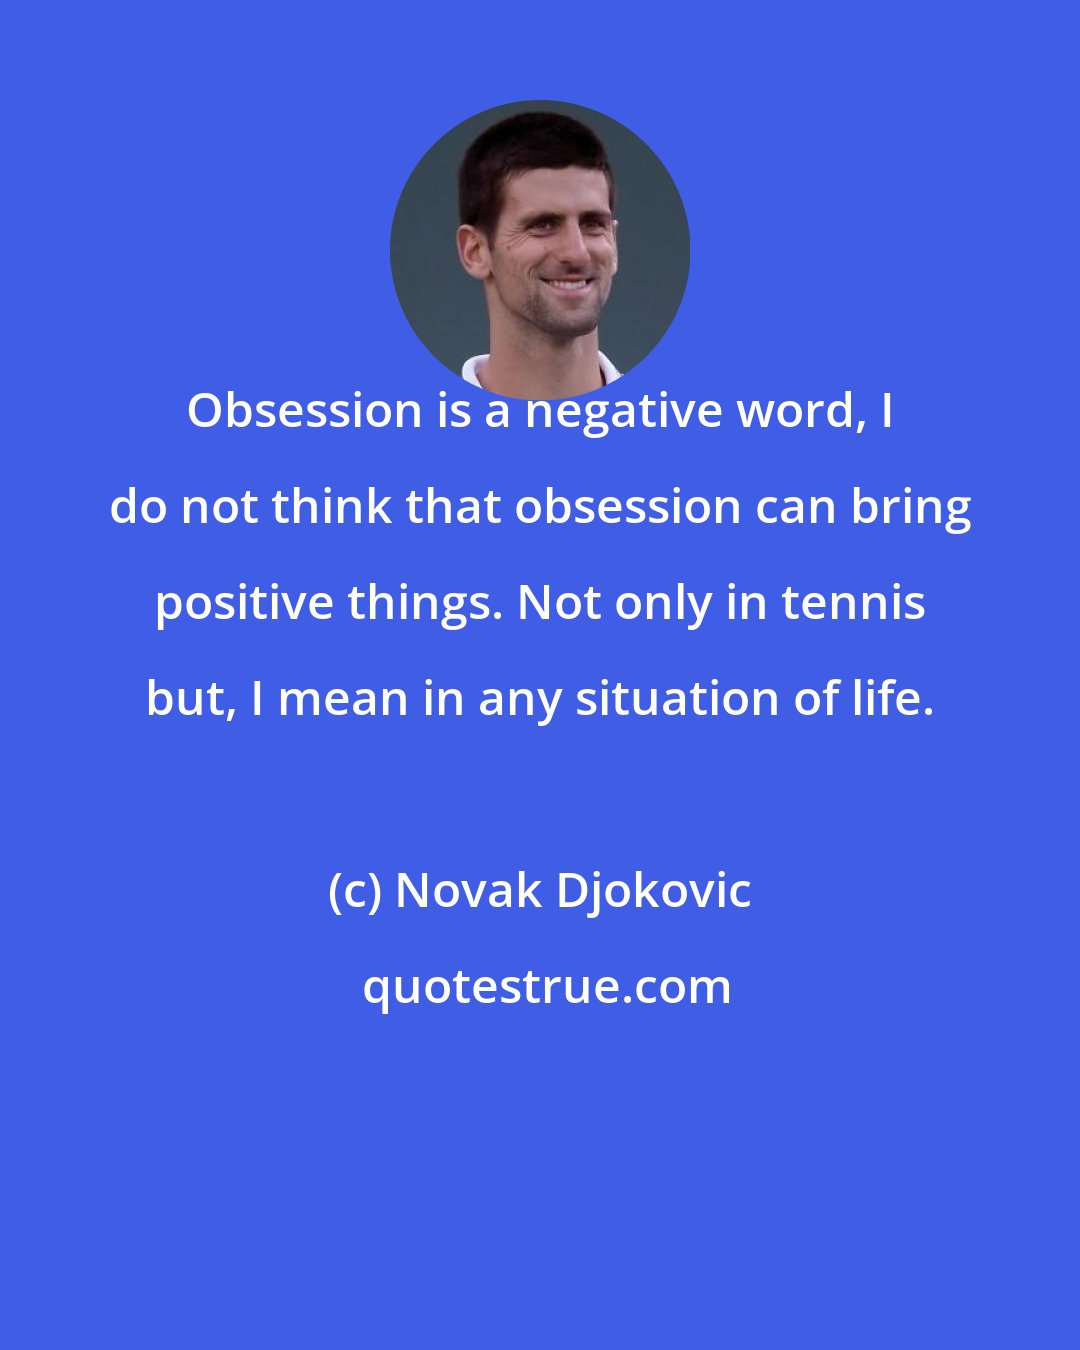 Novak Djokovic: Obsession is a negative word, I do not think that obsession can bring positive things. Not only in tennis but, I mean in any situation of life.